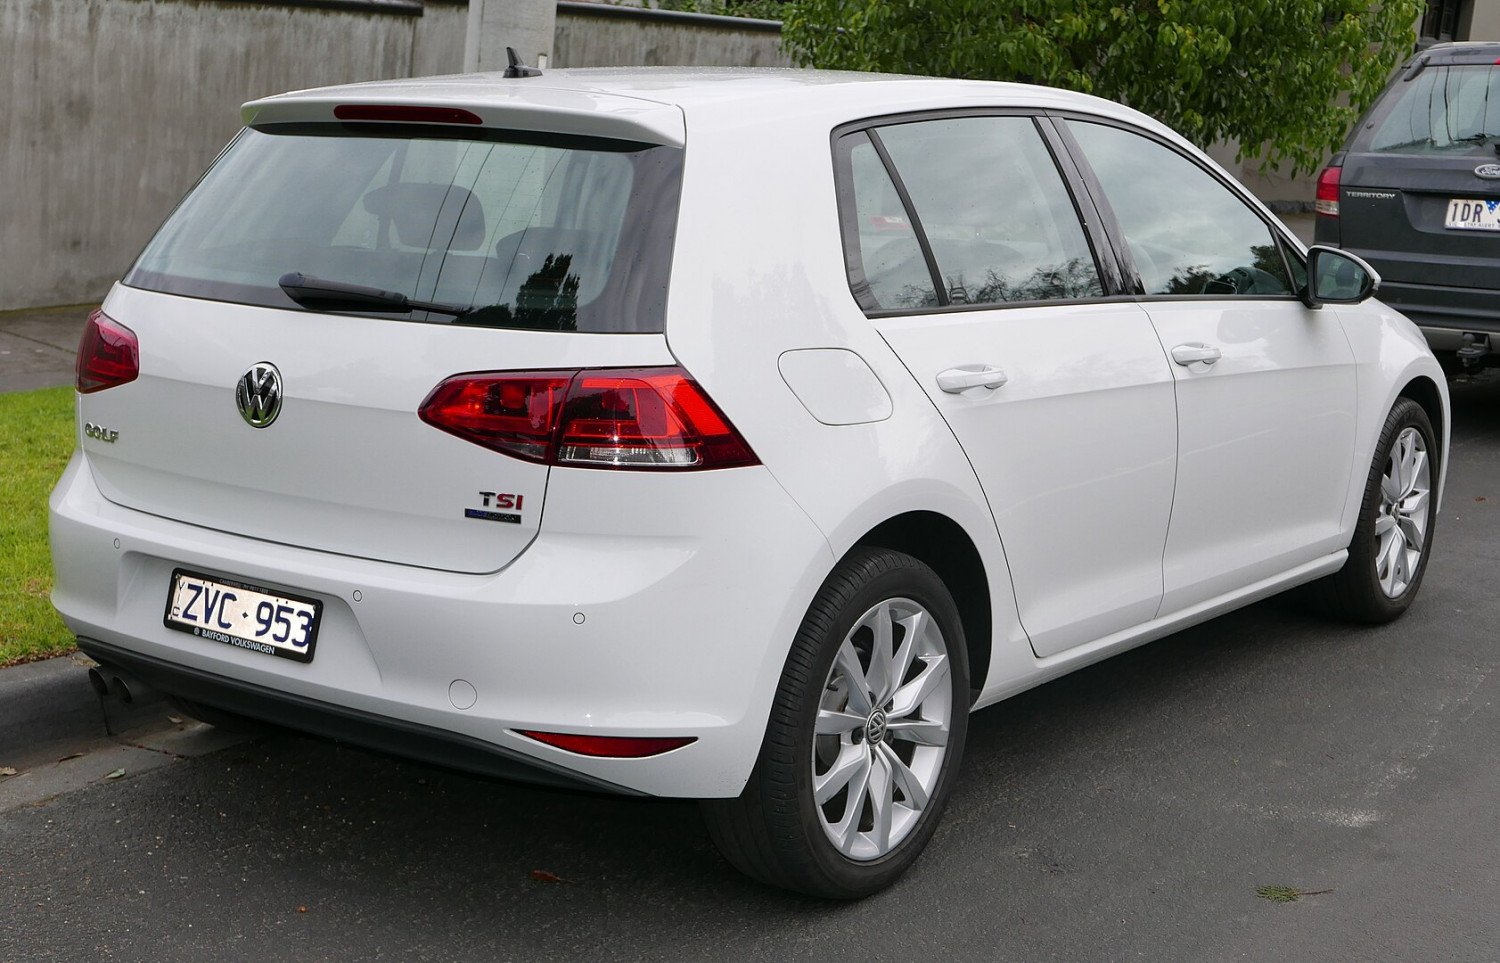 Example of a Golf VII (Mk7)